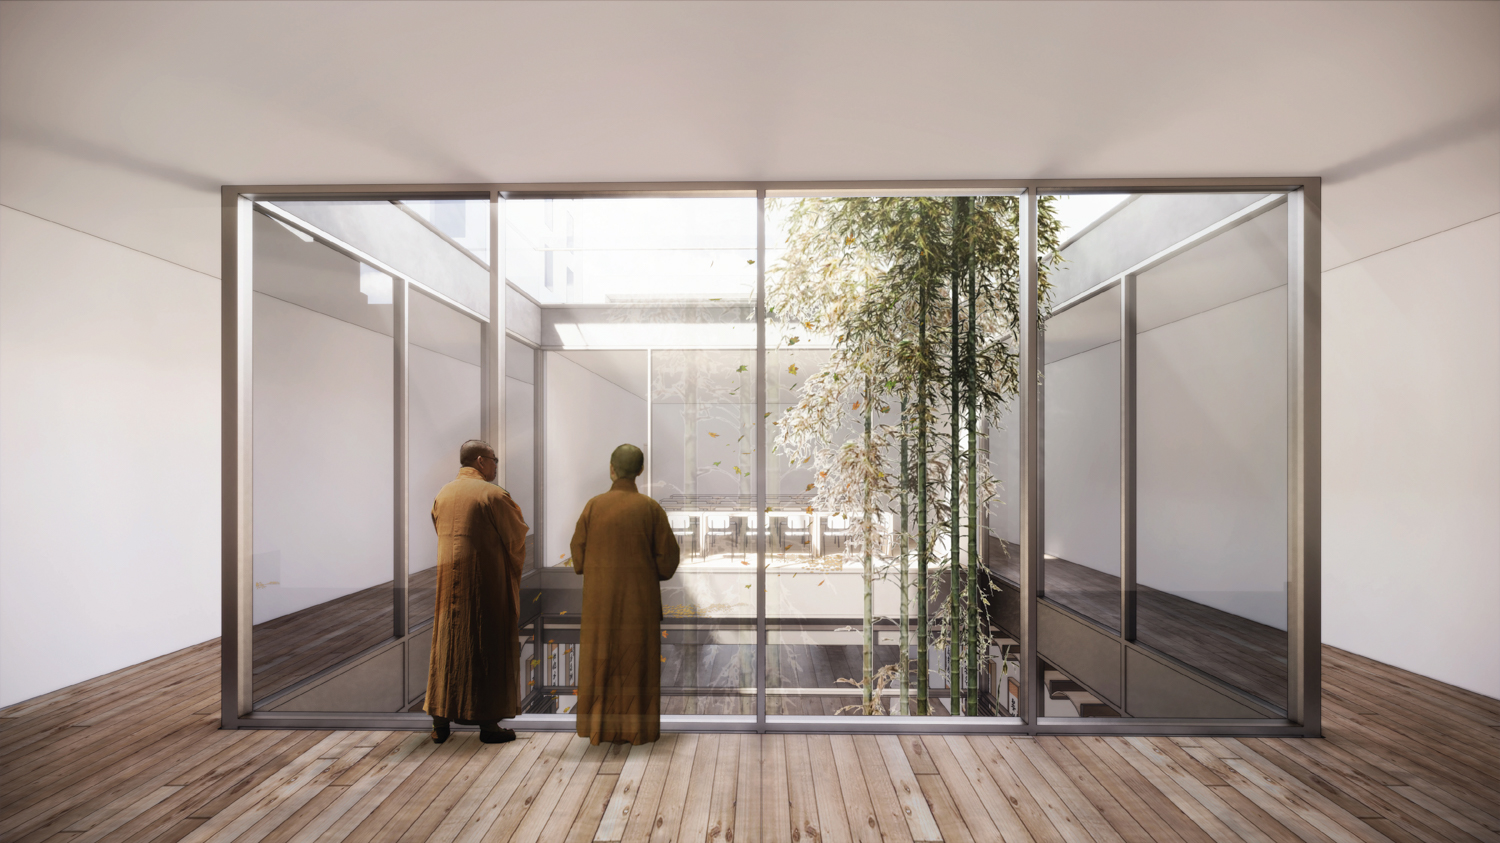 Interior courtyard of the new American Buddhist Cultural Society rendering for 1750 Van Ness Avenue, design by Skidmore, Owings & Merrill